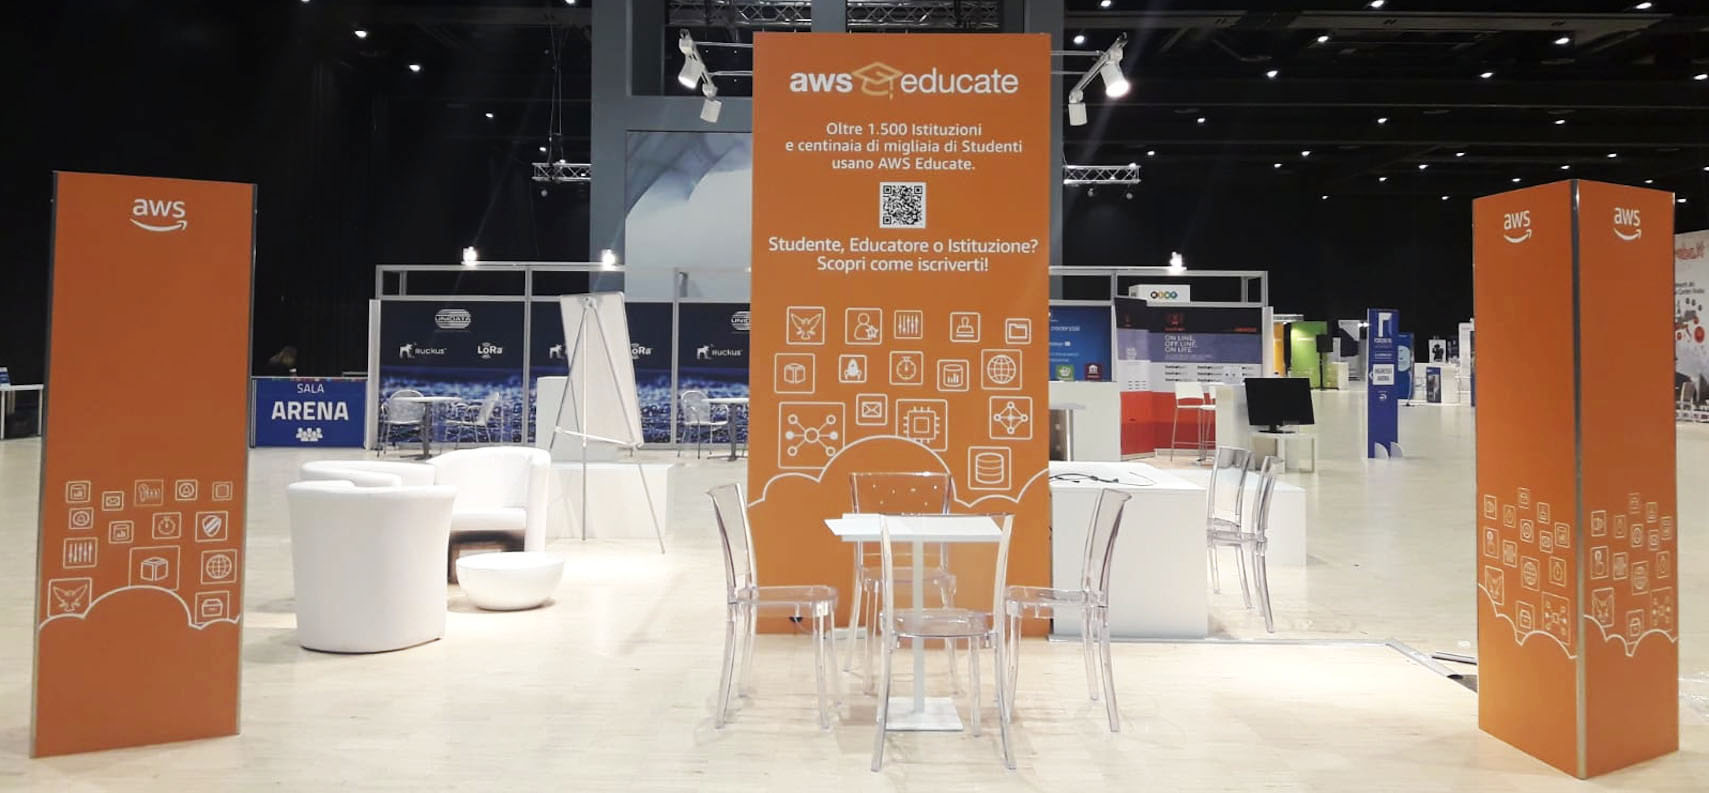 AWS booth at Forum PA fair created by ATC-Linea